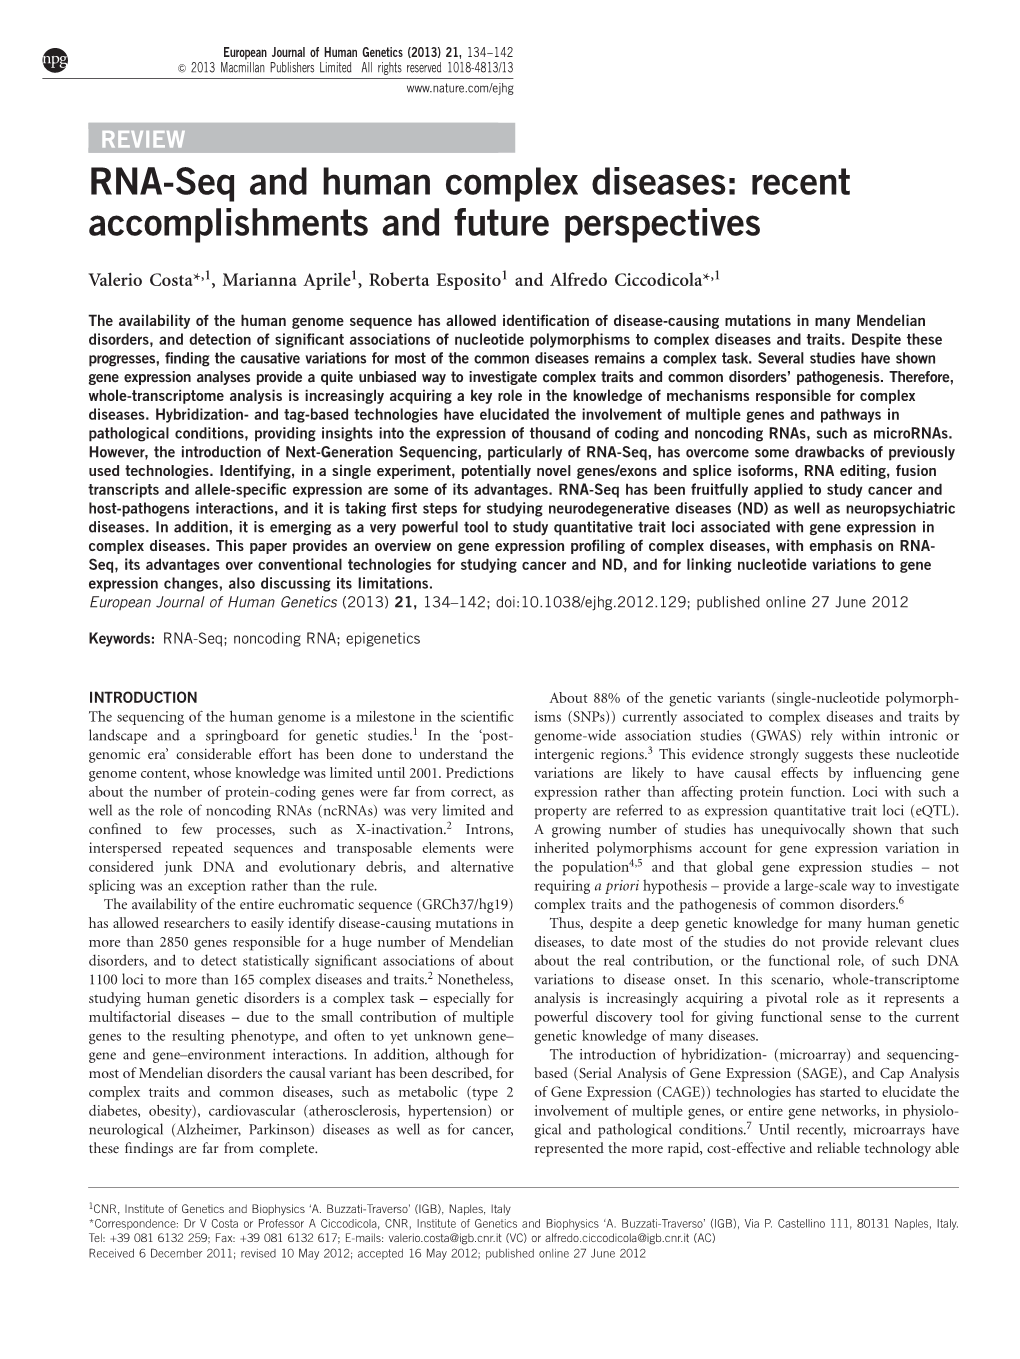 RNA-Seq and Human Complex Diseases: Recent Accomplishments and Future Perspectives